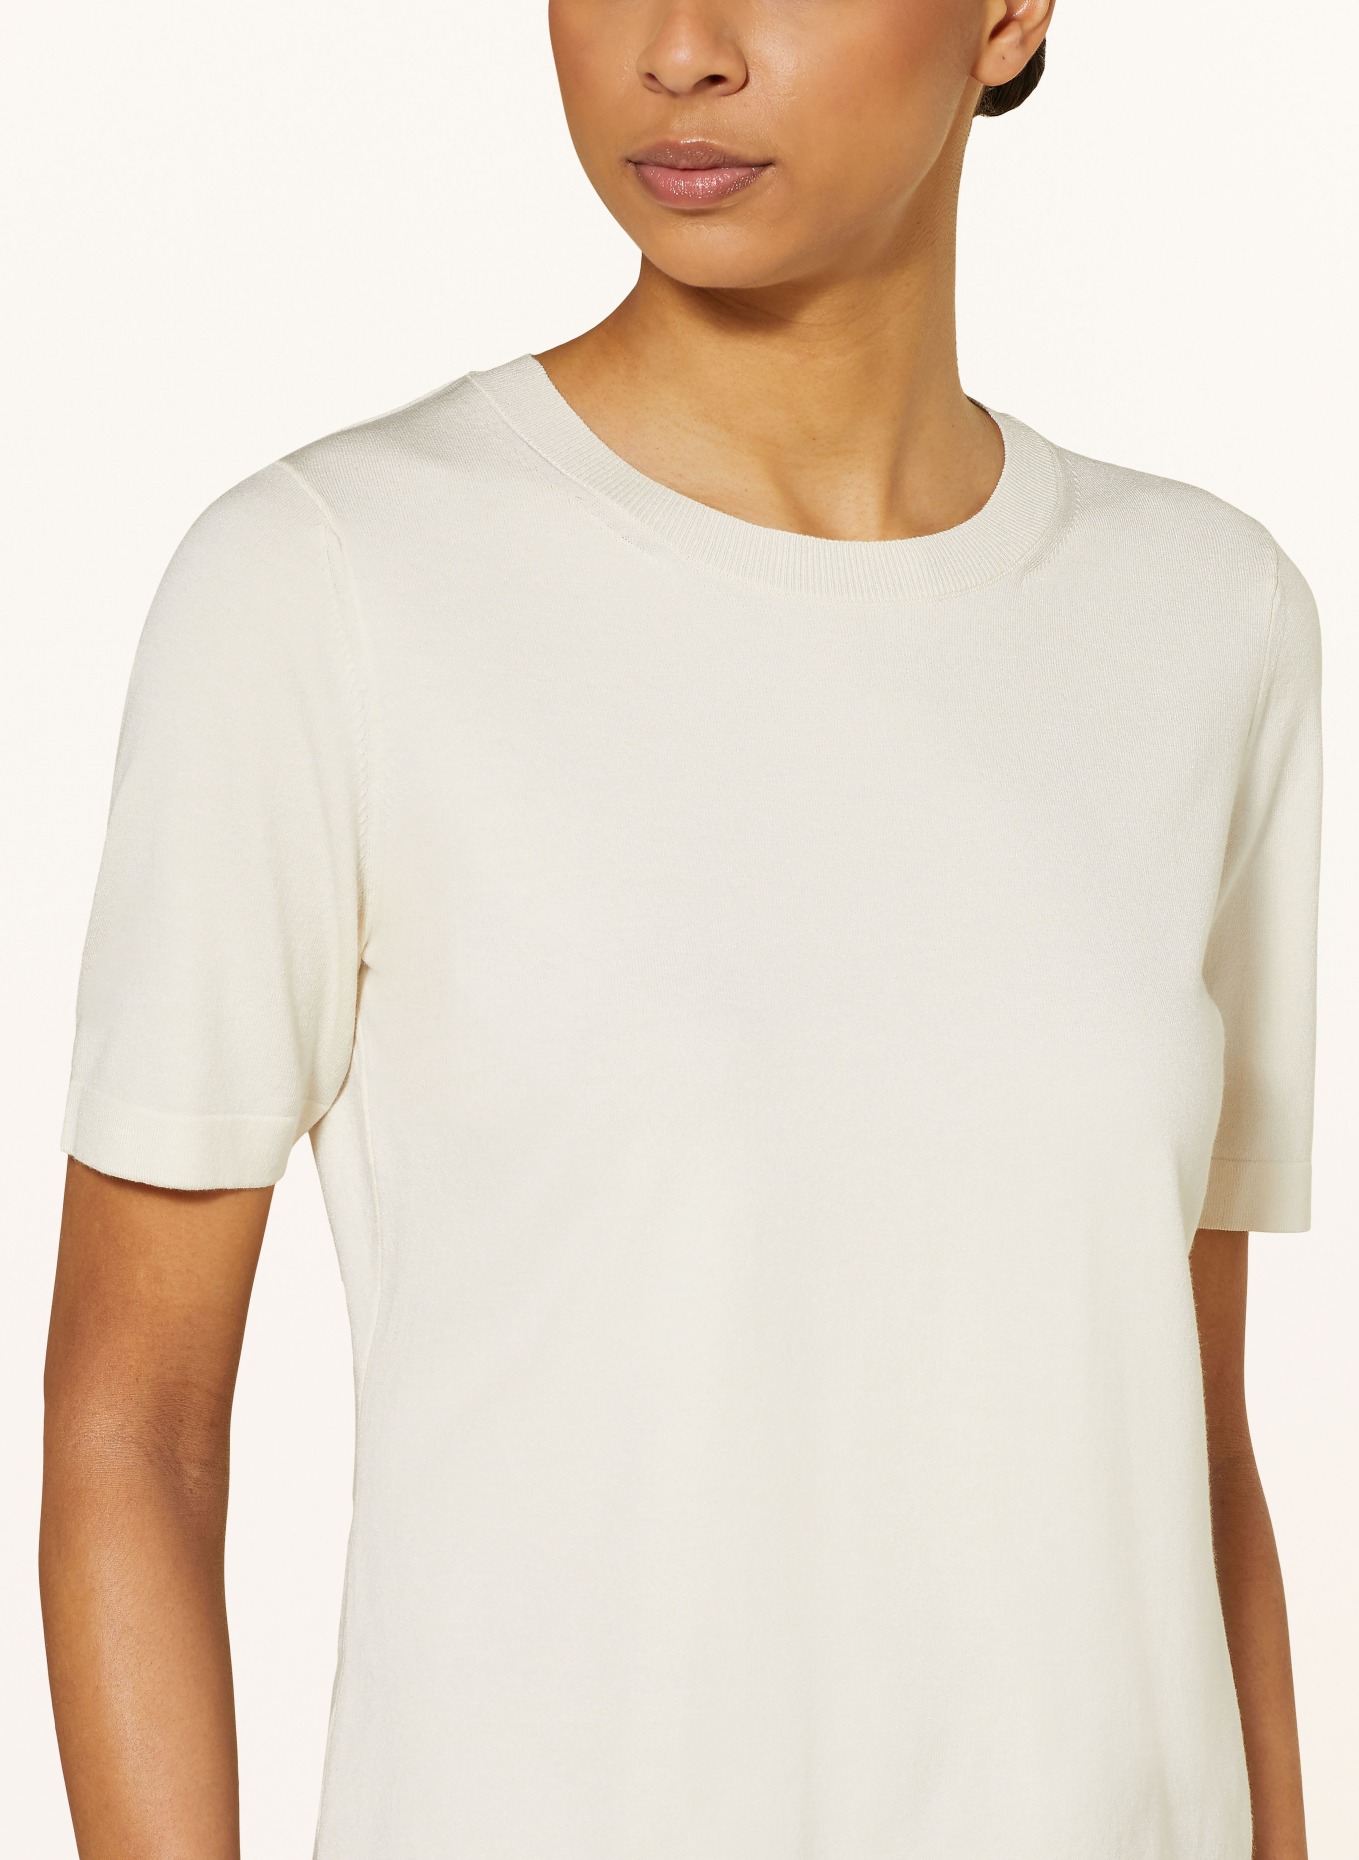 MAERZ MUENCHEN T-shirt, Color: LIGHT BROWN/ WHITE (Image 4)